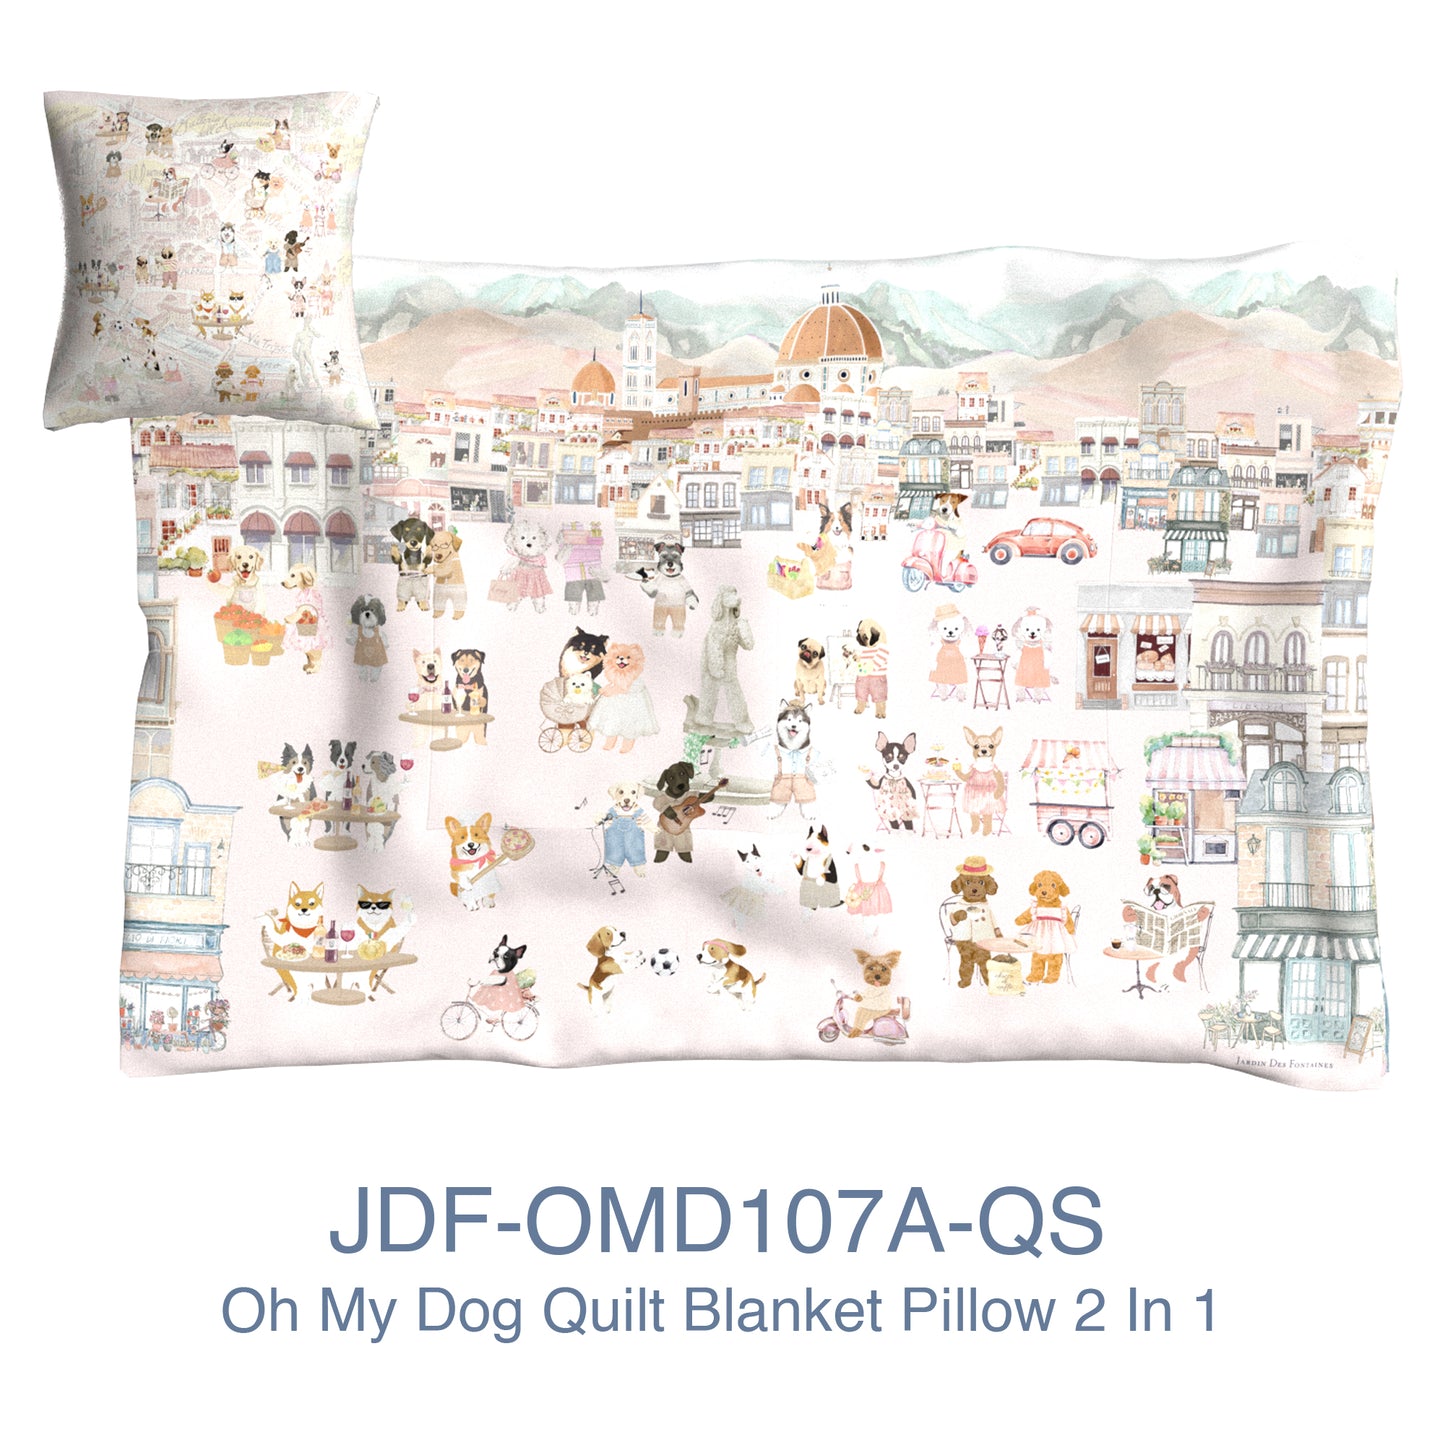 "Oh My Dog" Quilt Blanket Pillow 2 In 1